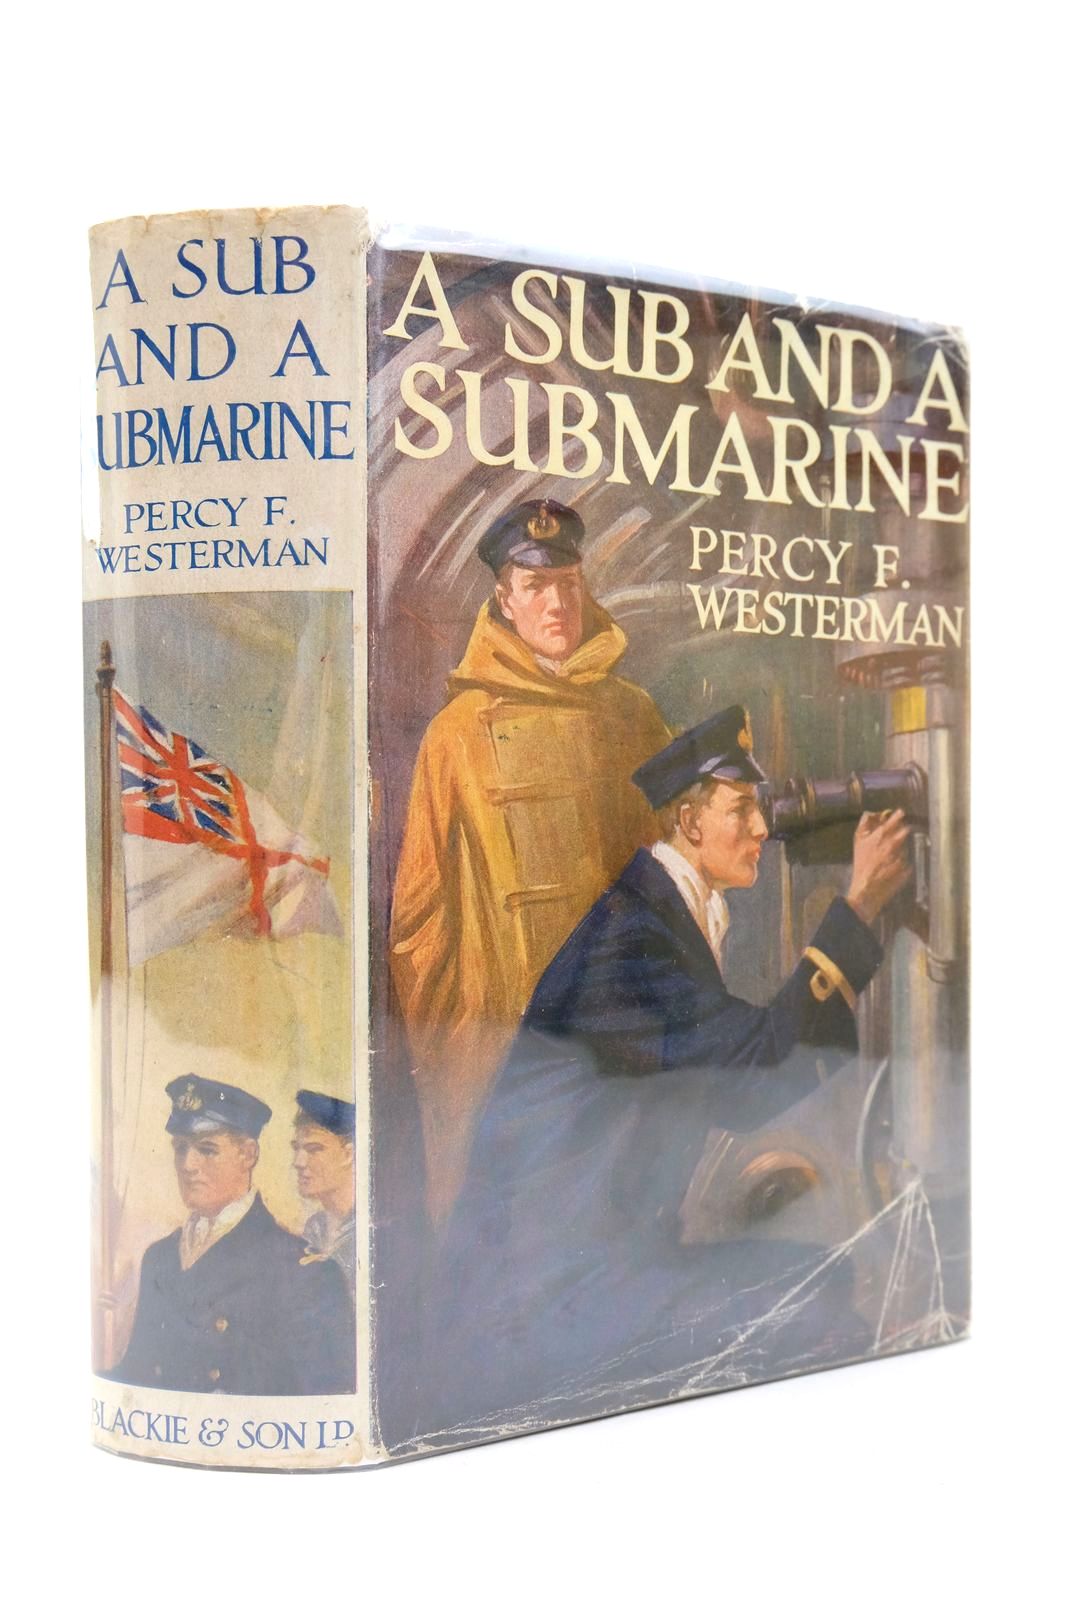 Photo of A SUB AND A SUBMARINE written by Westerman, Percy F. illustrated by Hodgson, E.S. published by Blackie & Son Ltd. (STOCK CODE: 2139252)  for sale by Stella & Rose's Books